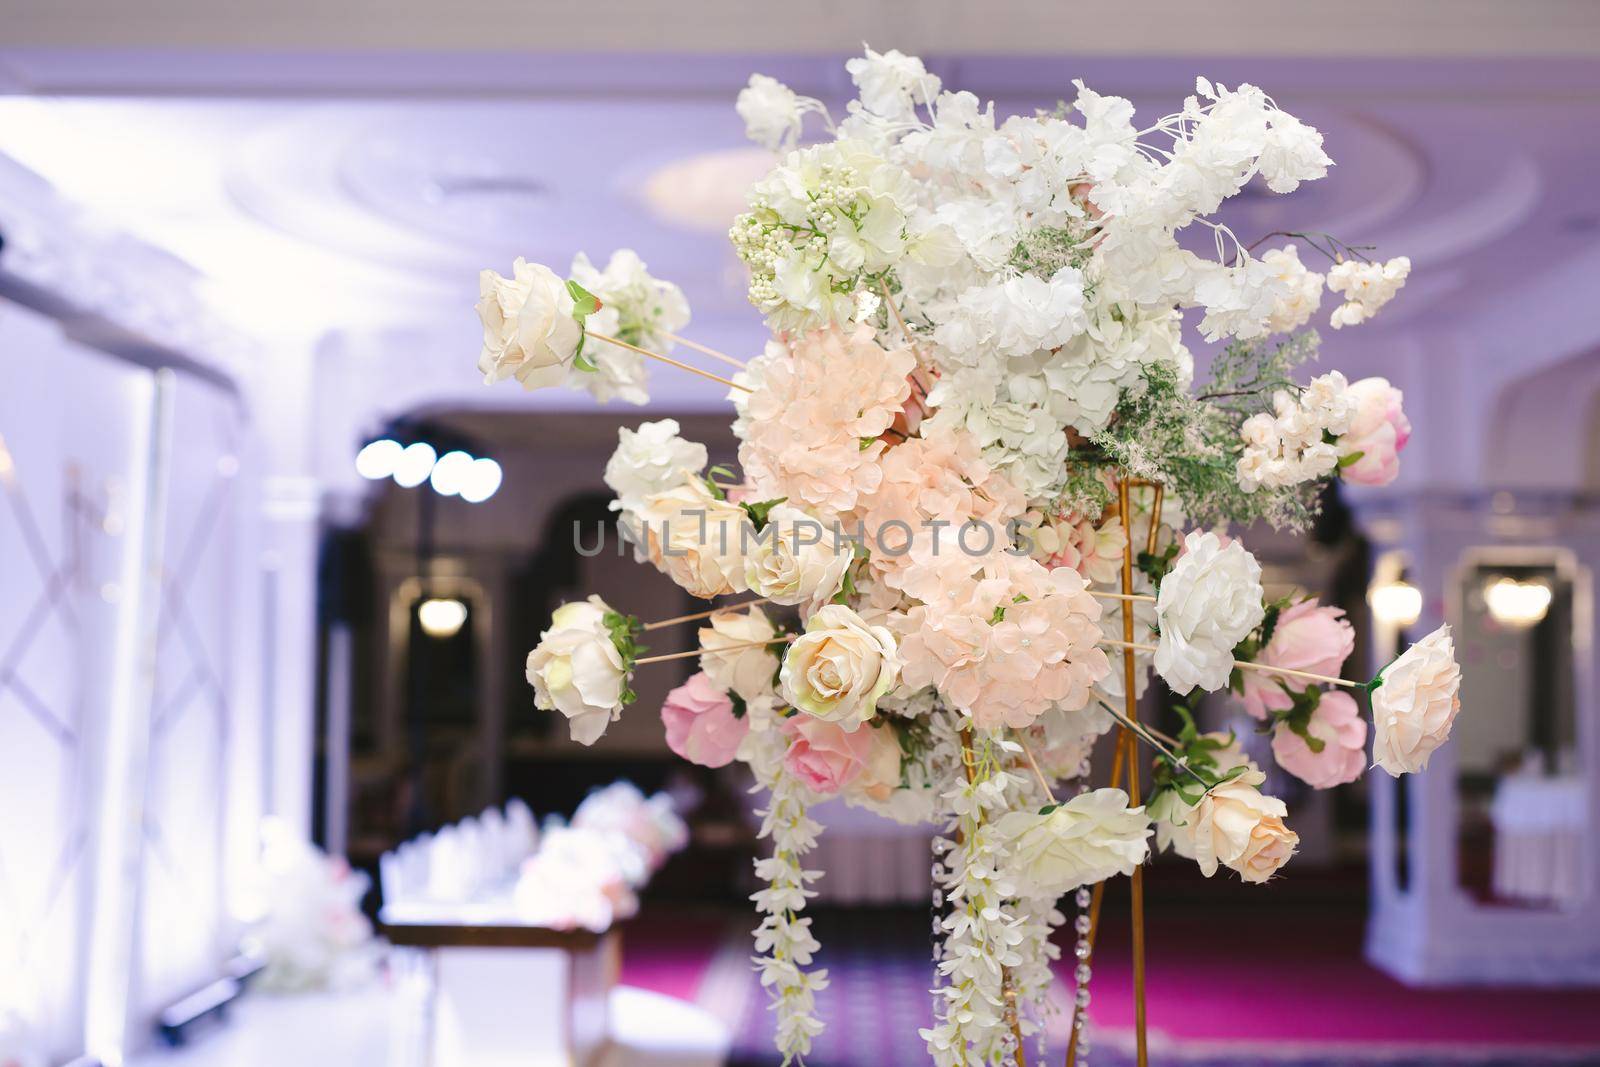 Floral decorations for holidays and wedding dinner